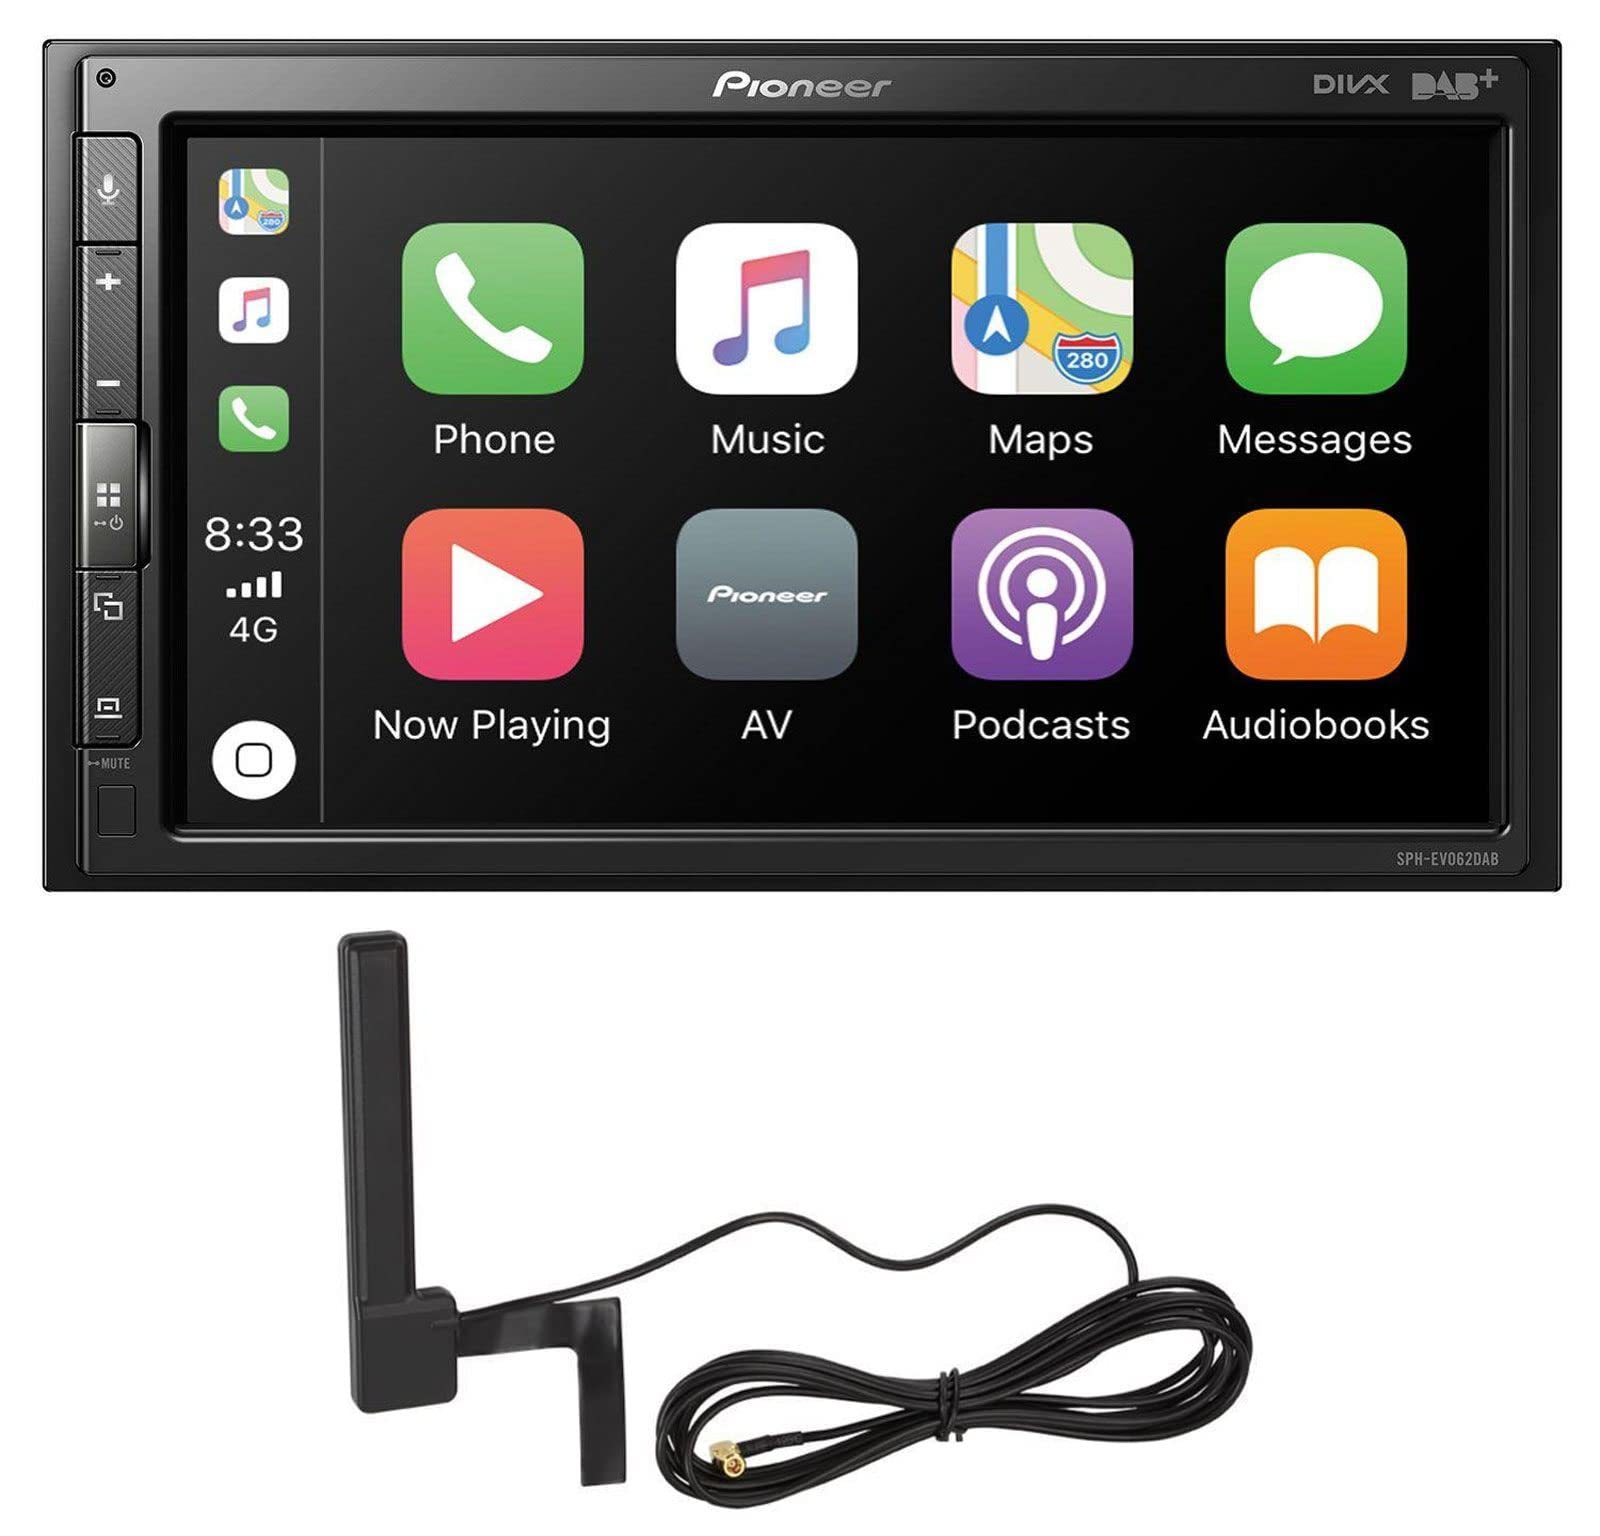 Pioneer SPH-EVO62DAB-AN Mediacenter – 6,8-Zoll Touchscreen, 1,5A Quick-Charging USB, Apple CarPlay, Android Auto, DAB/DAB+ Digitalradio, Bluetooth, 13-Band-Equalizer, inklusive DAB-Antenne von Pioneer